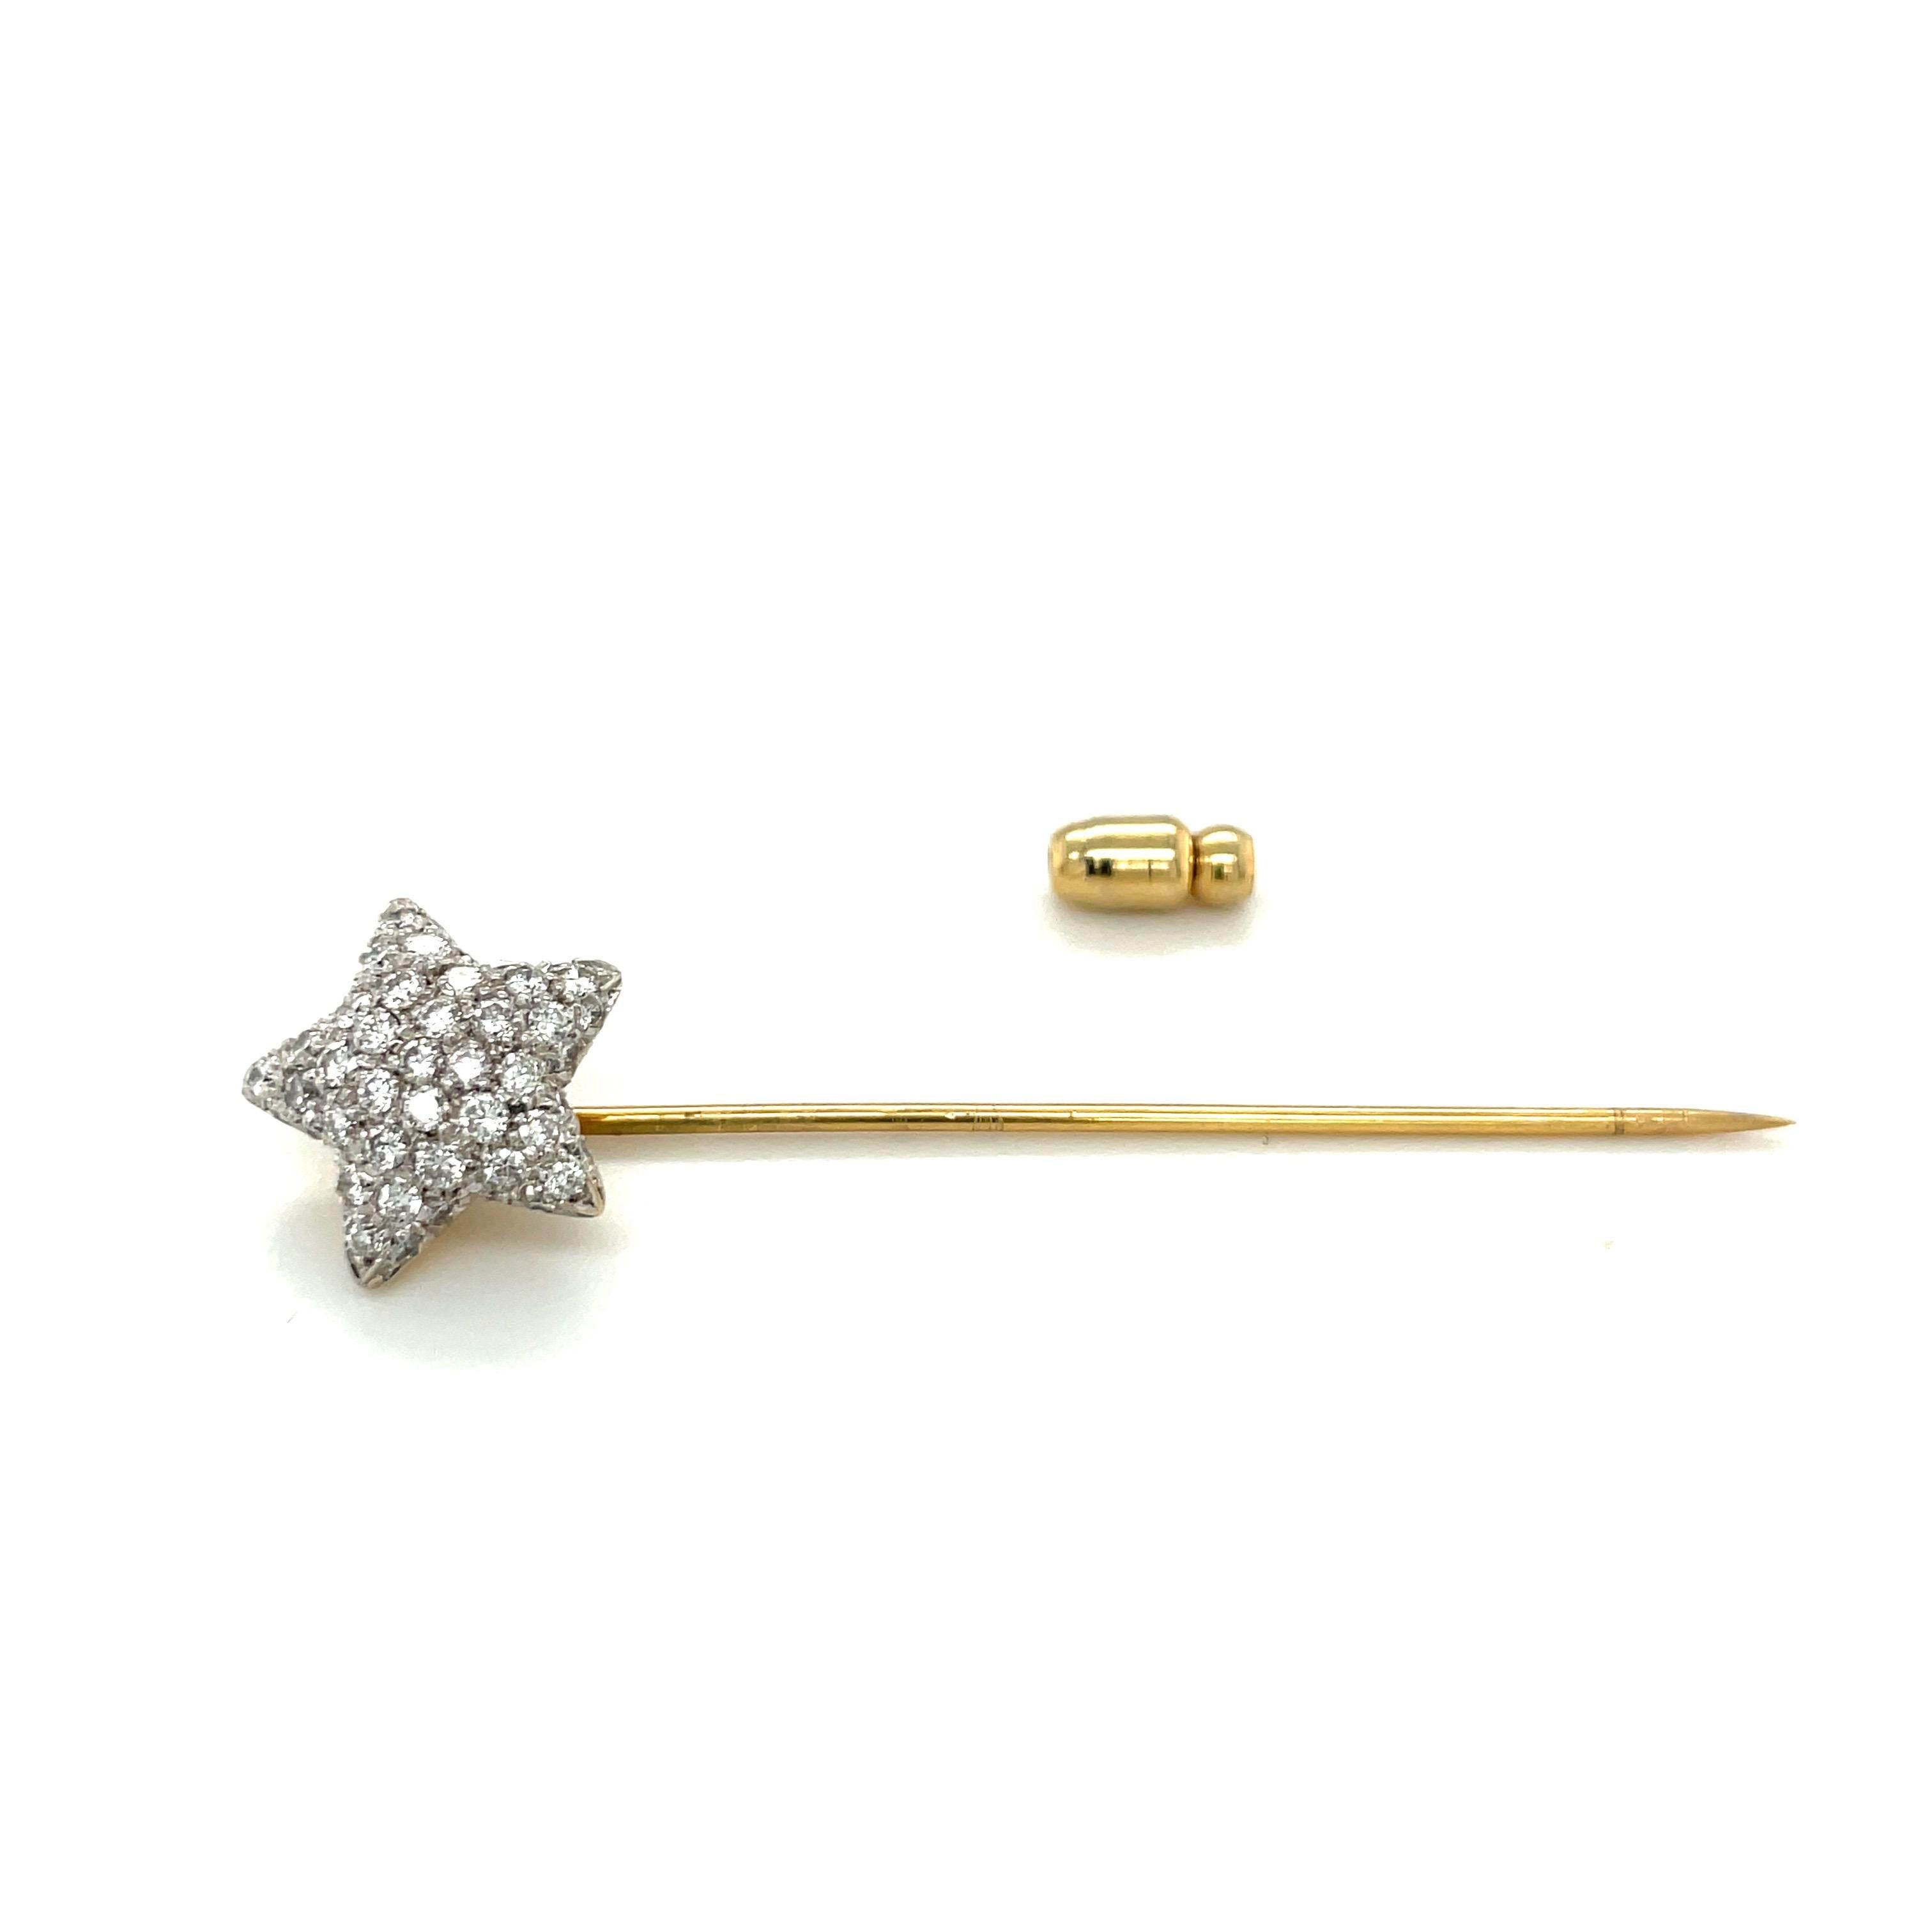 Some things will always remain classic, and this is one of them.
The 18 karat yellow gold stick pin is designed with a  pave' diamond five pointed star.
Total diamond weight = 0.93 carats
Total length = 2.25